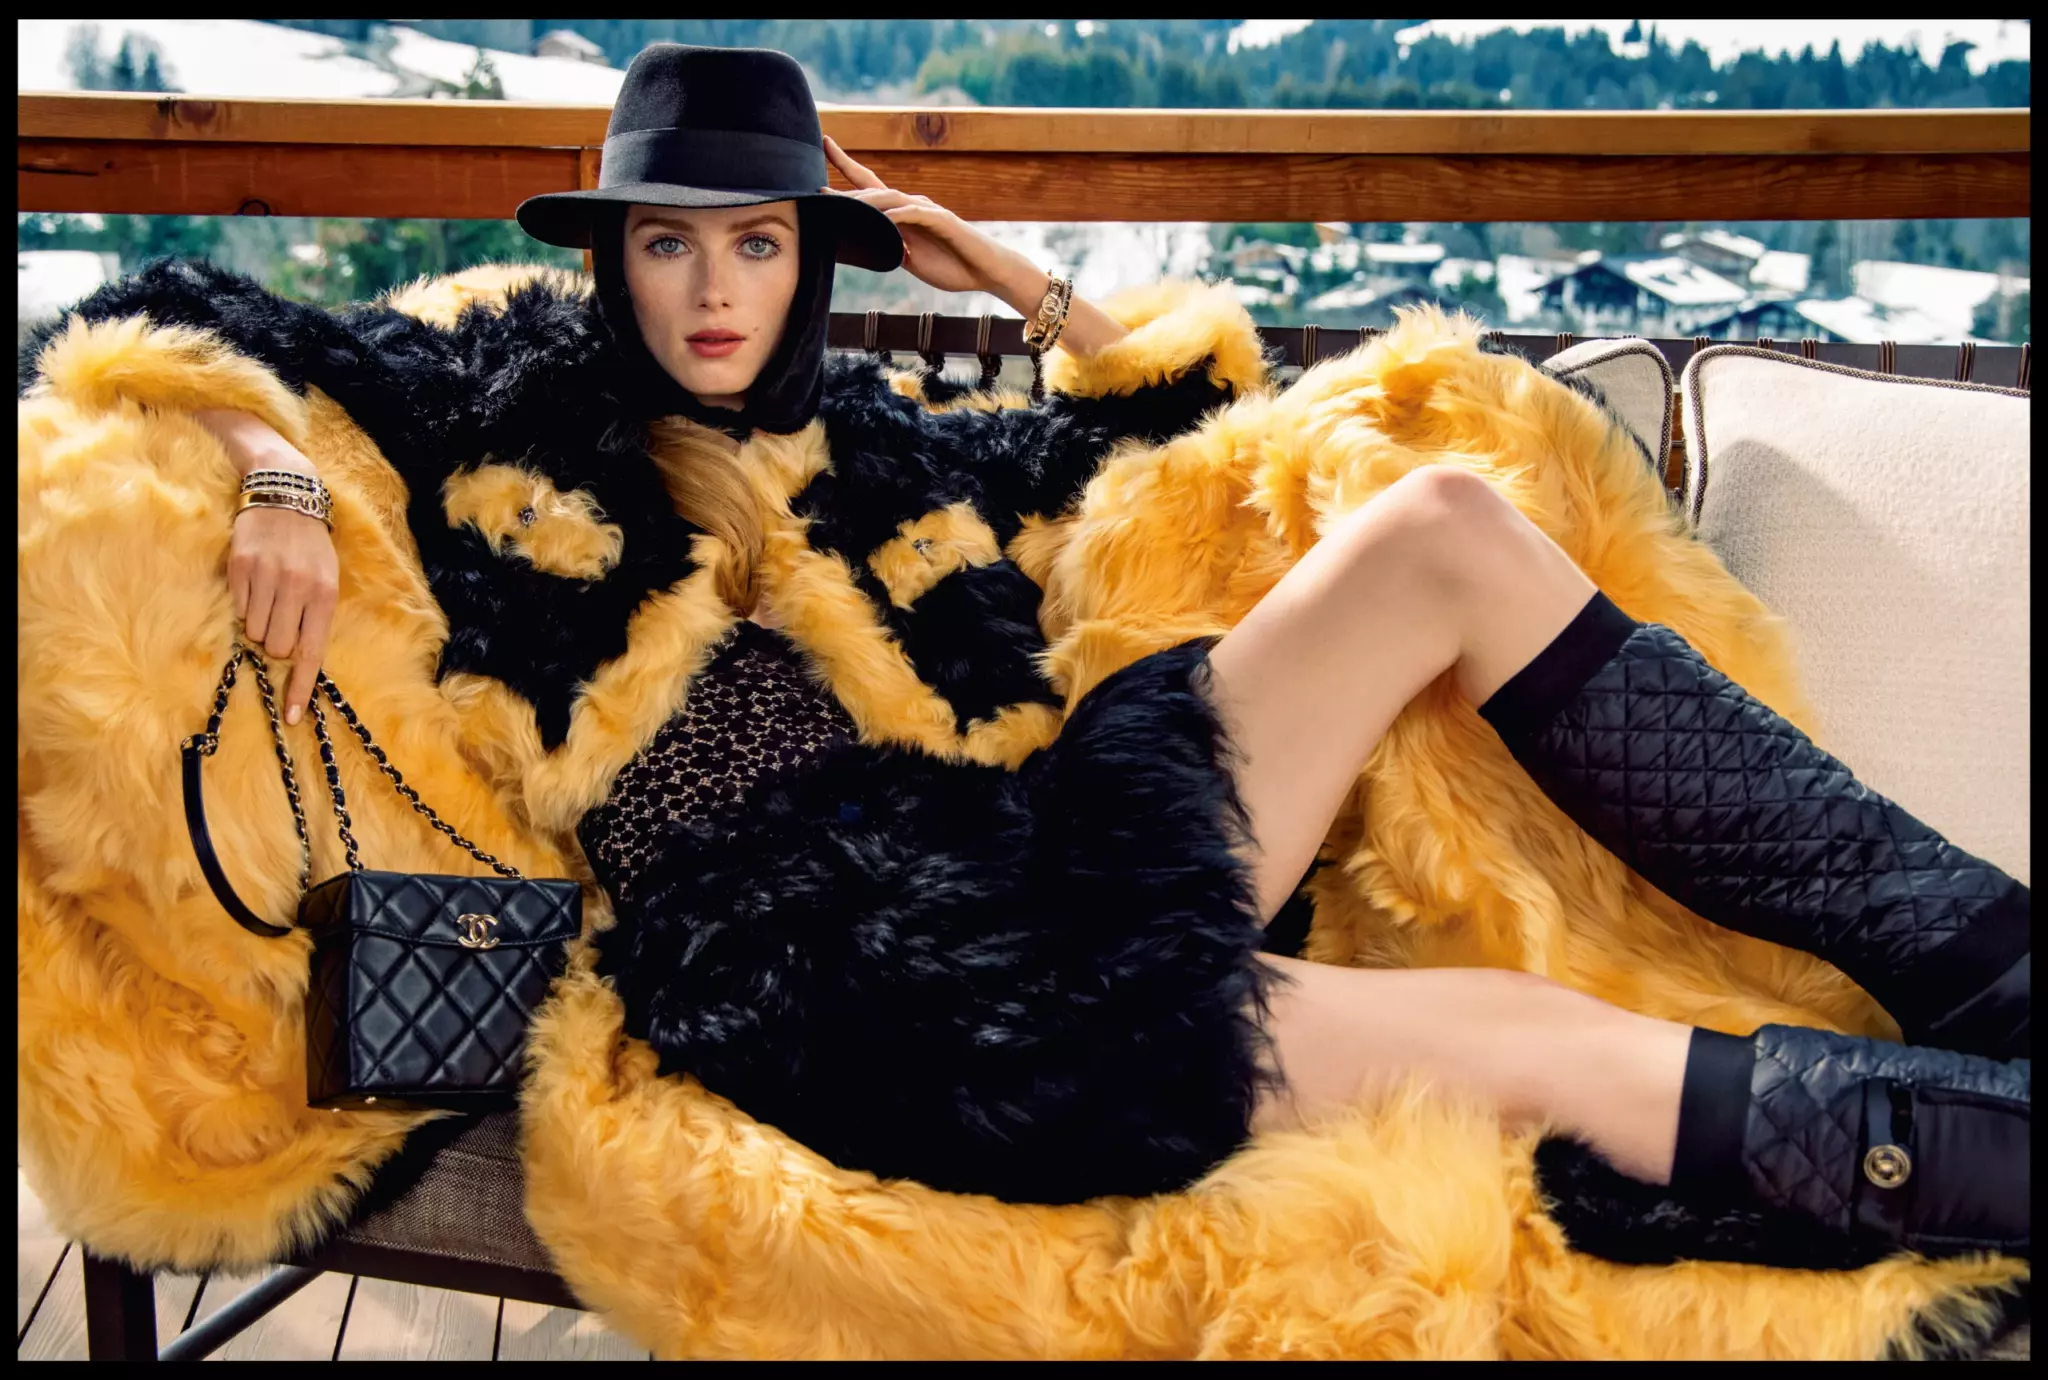 Fall-Winter 21/22 trends that fashionistas will adopt this season. Focus on iconic Chanel, Baum und Pferdgarten, By Malina and By Malene Birger. 1